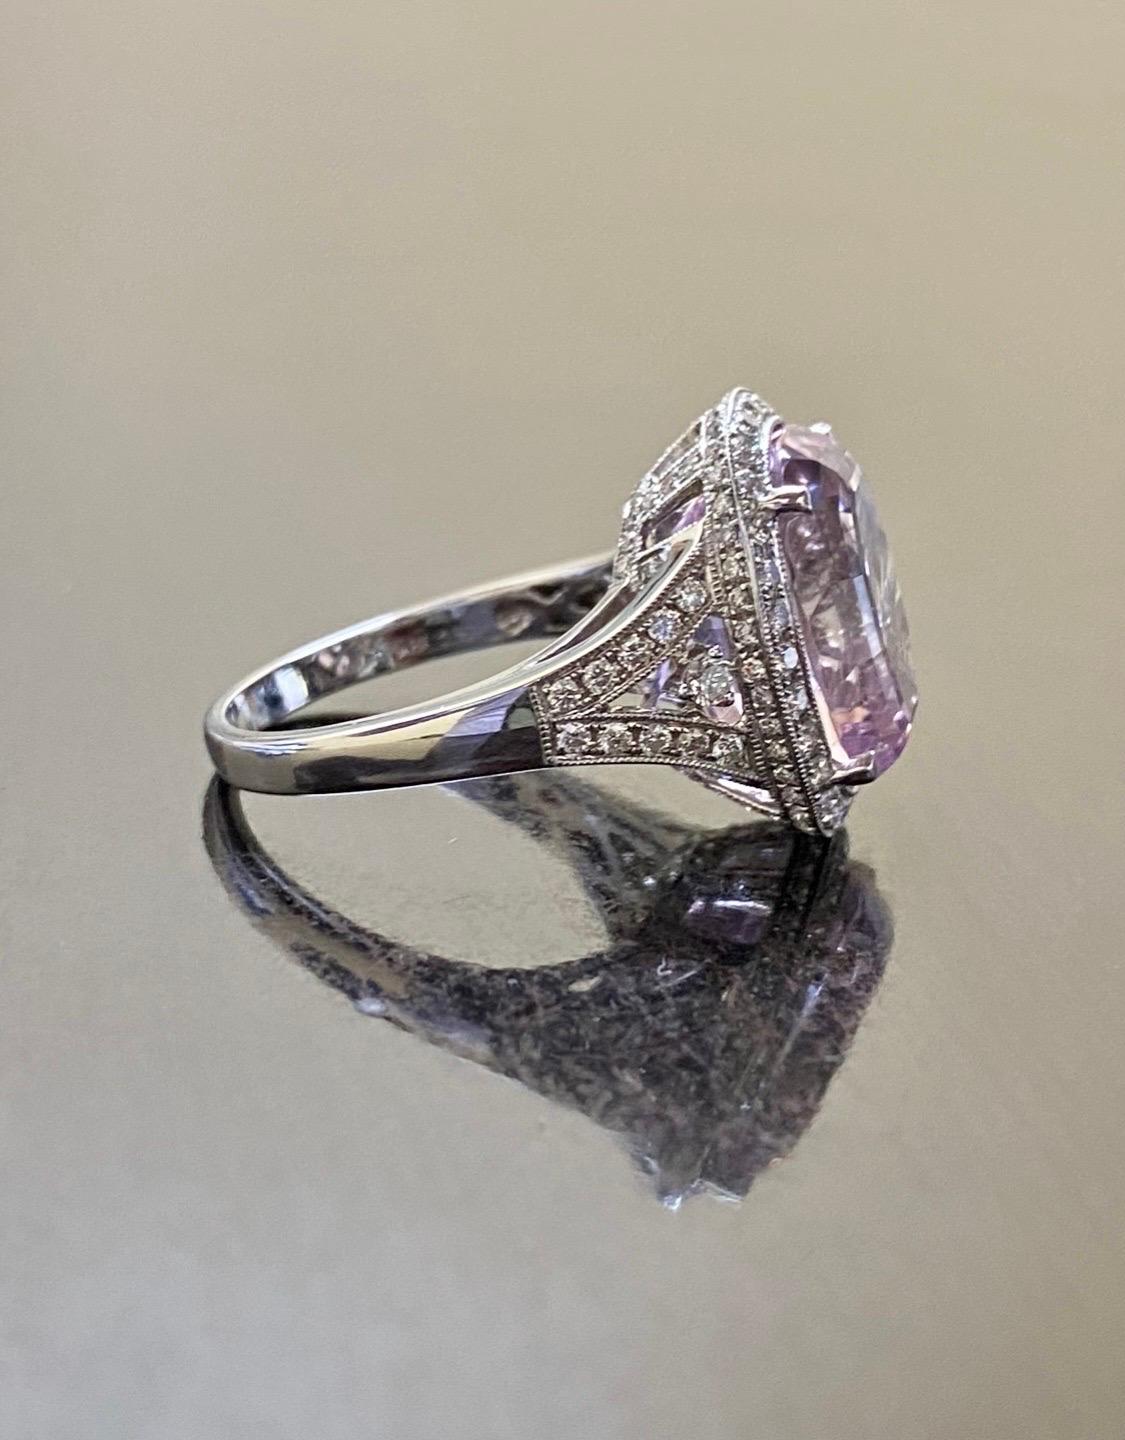 DeKara Designs Collection

Our latest design! An elegant and lustrous Oval Kunzite surrounded by beautiful diamonds in a halo setting.

Metal- 18K White Gold, .750.

Stones- Center Features an Genuine Oval Kunzite, 13.18 Carats, 44 Round Diamonds,